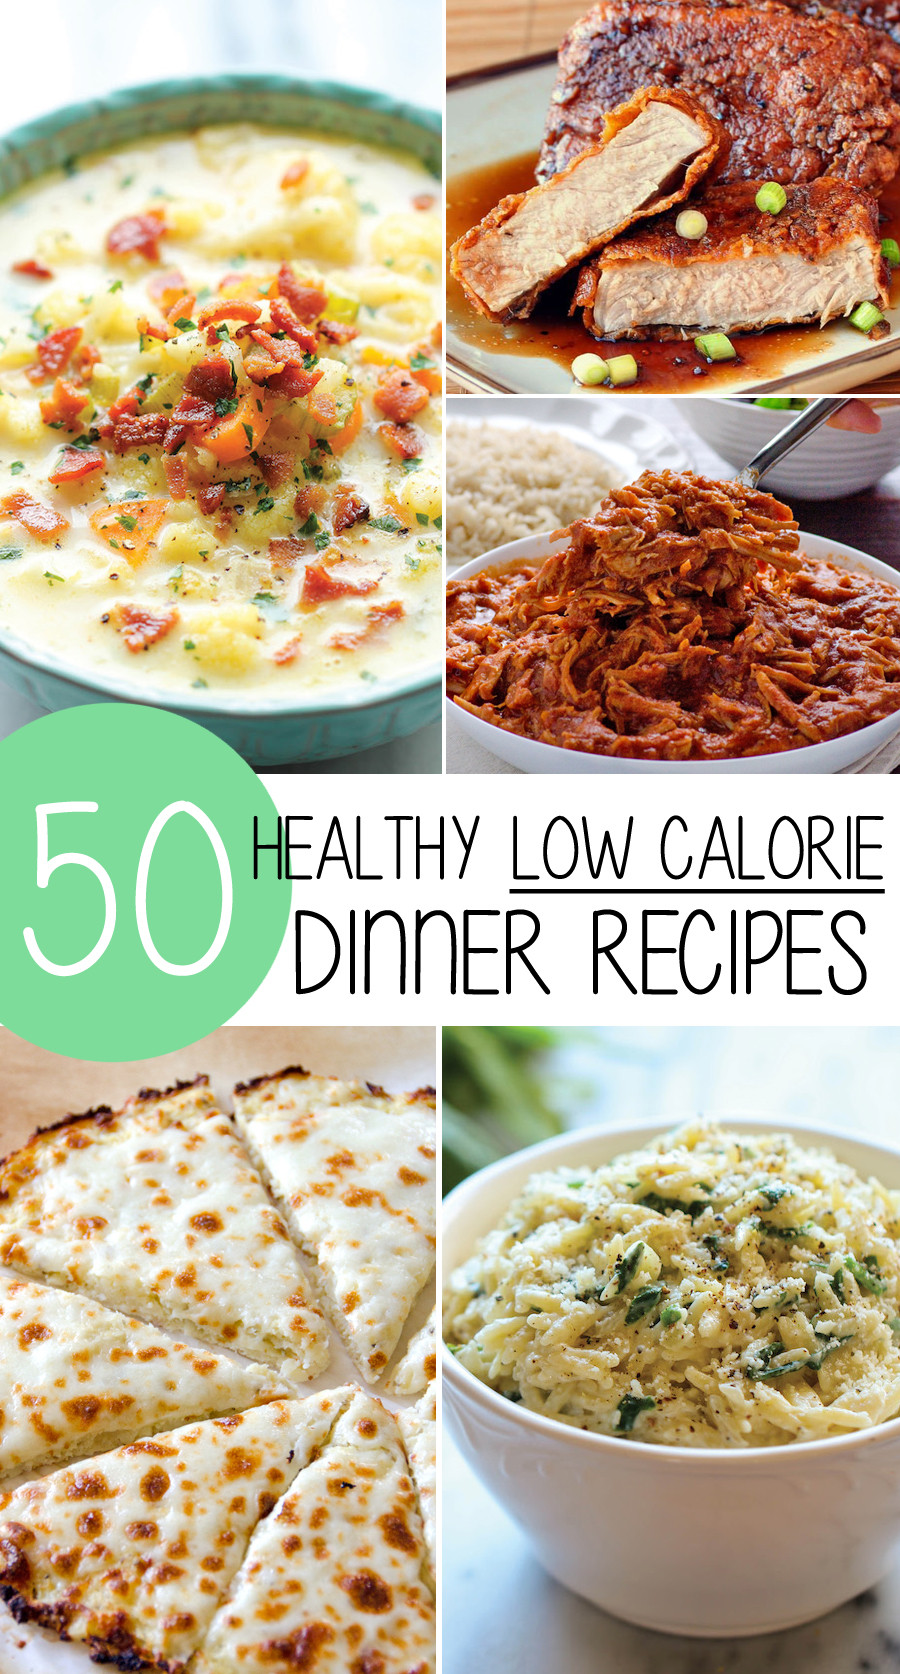 Healthy Low Fat Dinner Recipes
 50 Healthy Low Calorie Weight Loss Dinner Recipes